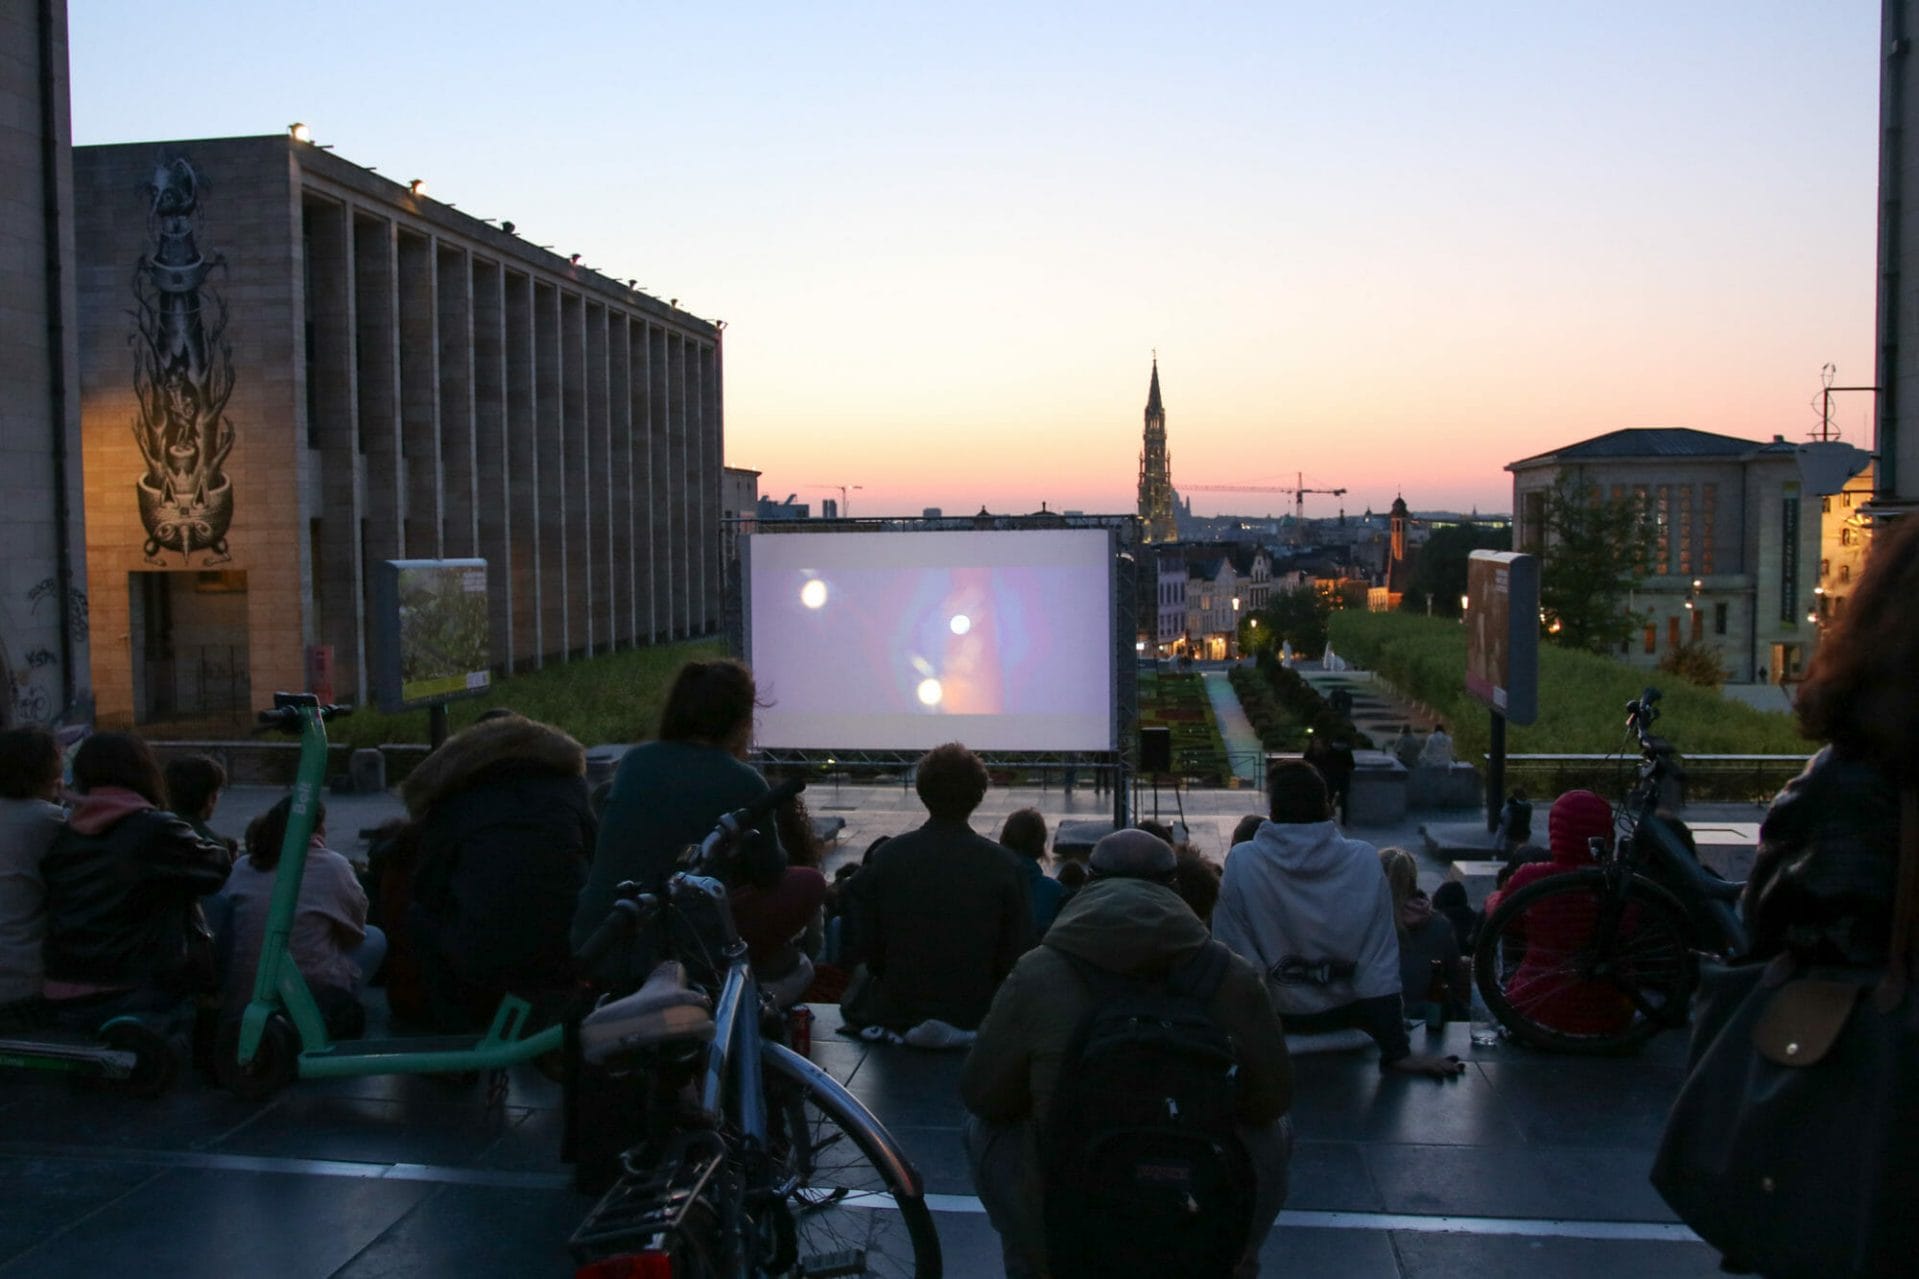 Day 8 - 27.04.2022 - Open Air Screening #1